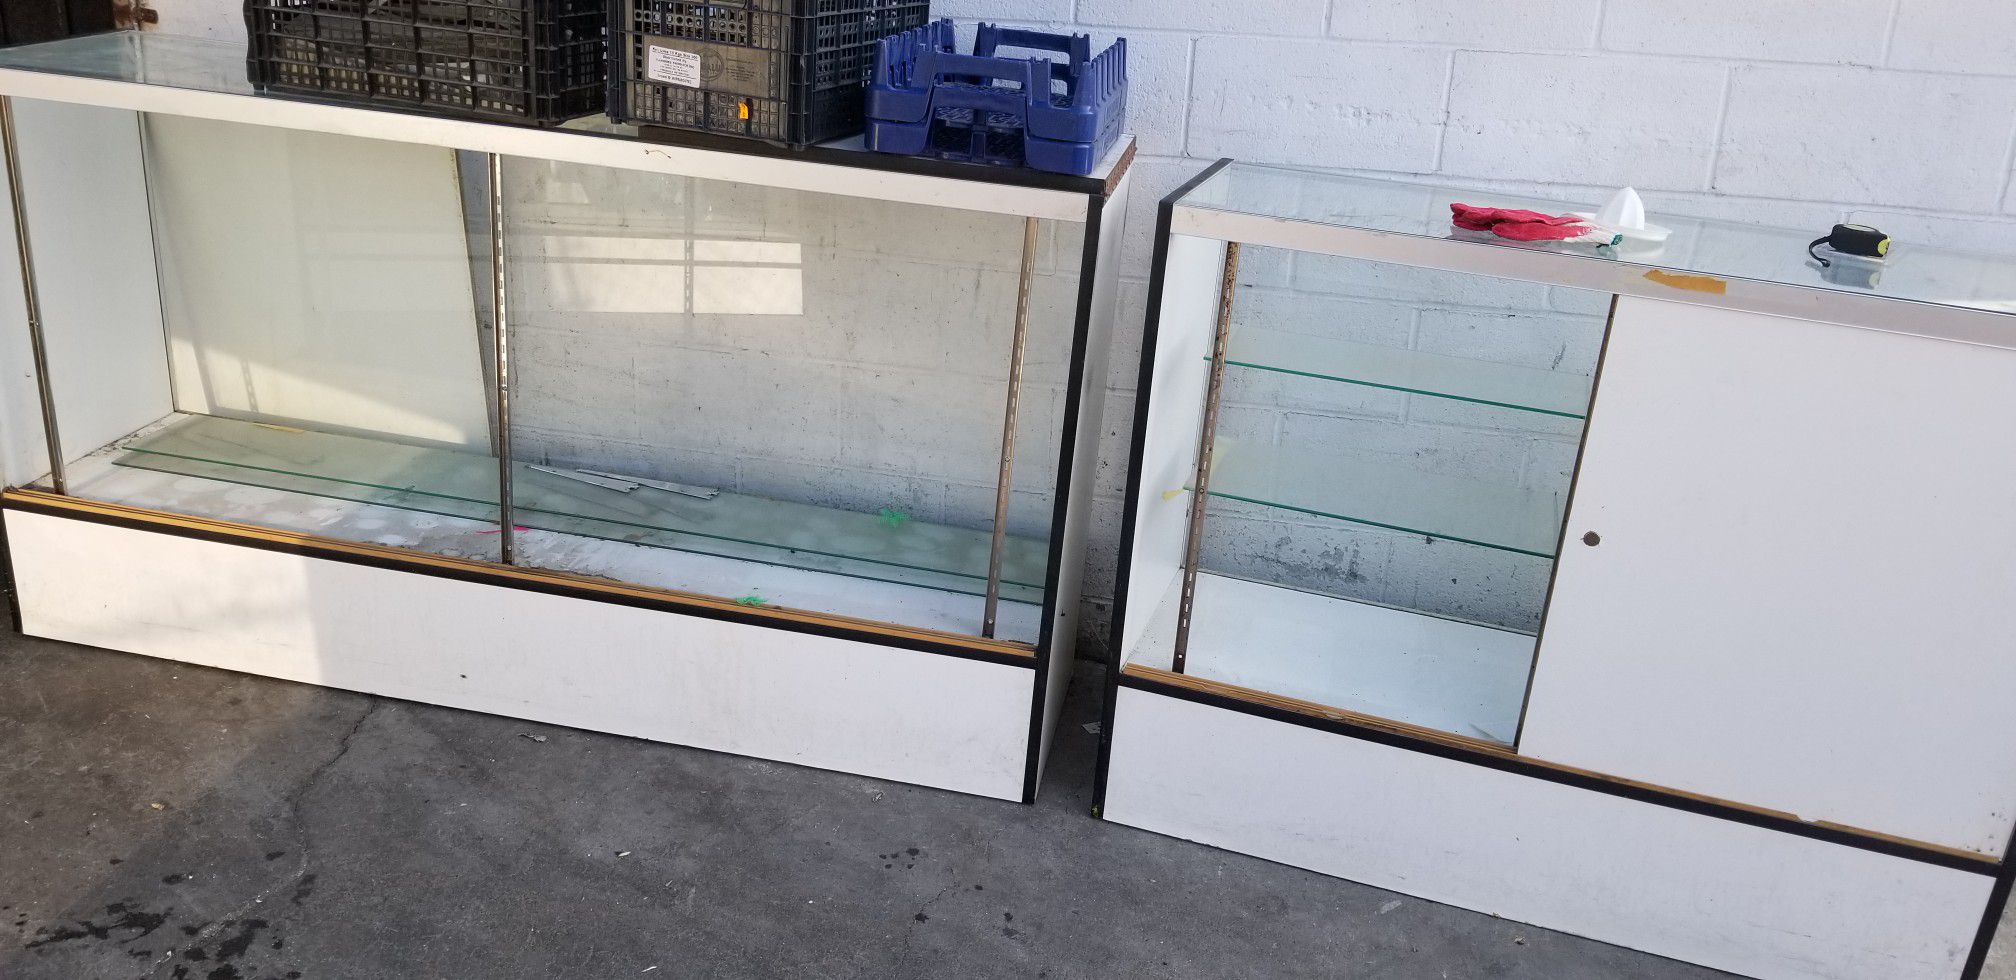 Counter display free no hold pick up only need gone today